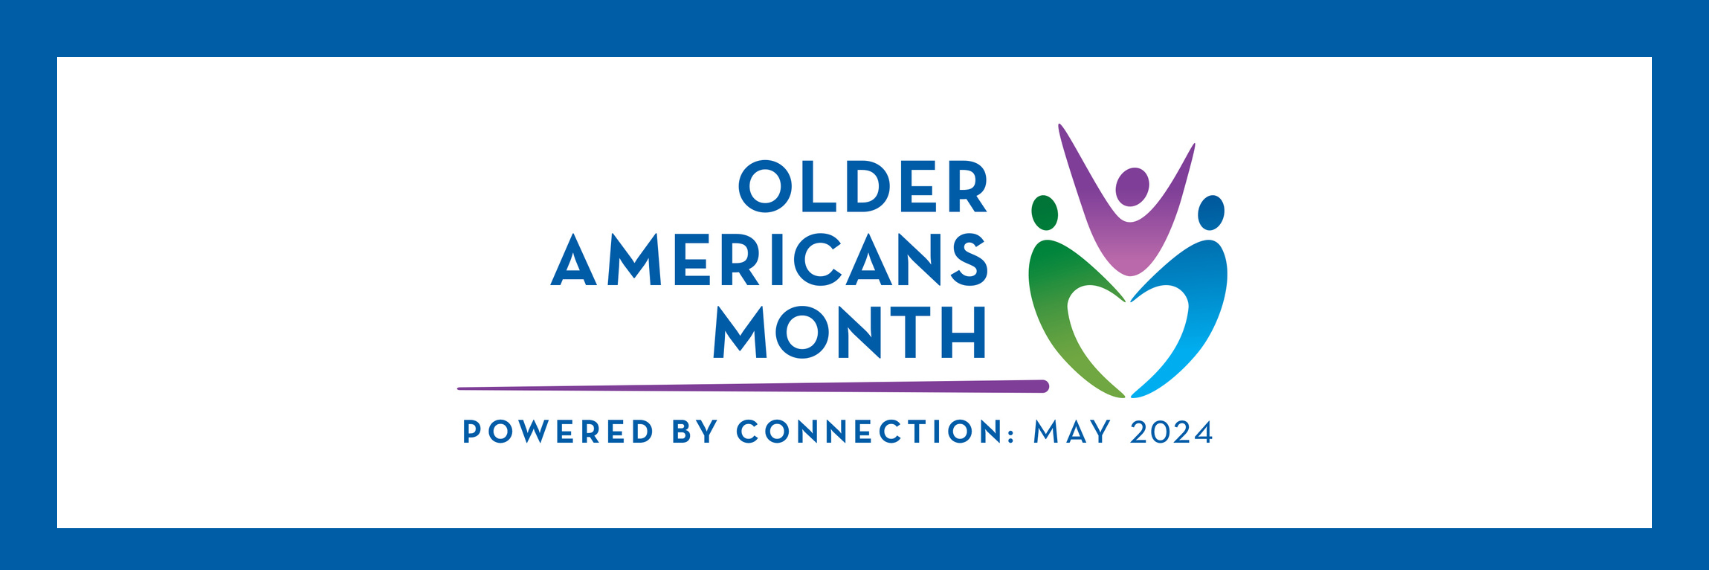 Older Americans Month Logo with three symbolic human figures connected together so the negative space forms a heart along with text that says Older Americans Month Powered By Connection May 2024